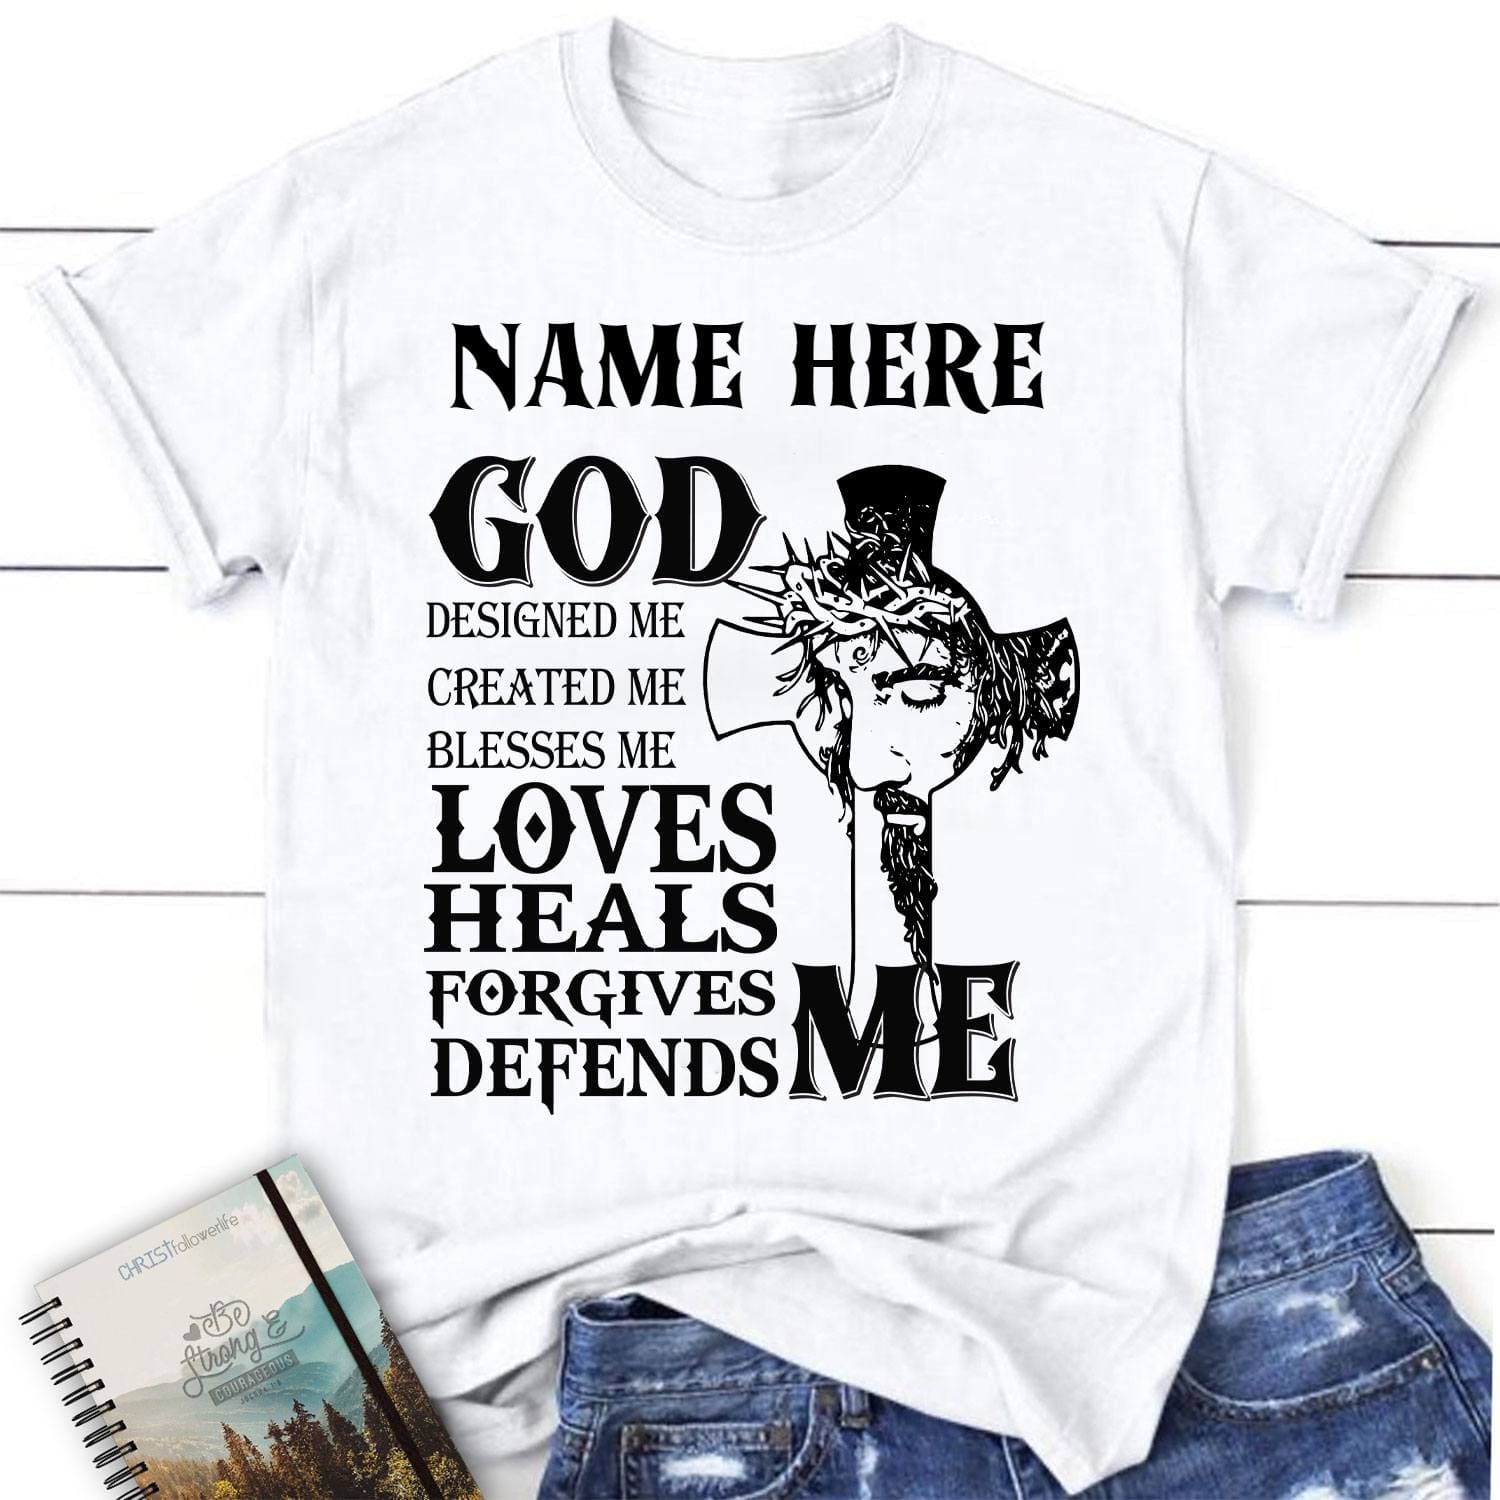 God designed me, created me, blesses me, loves and heals - Gift for God believers